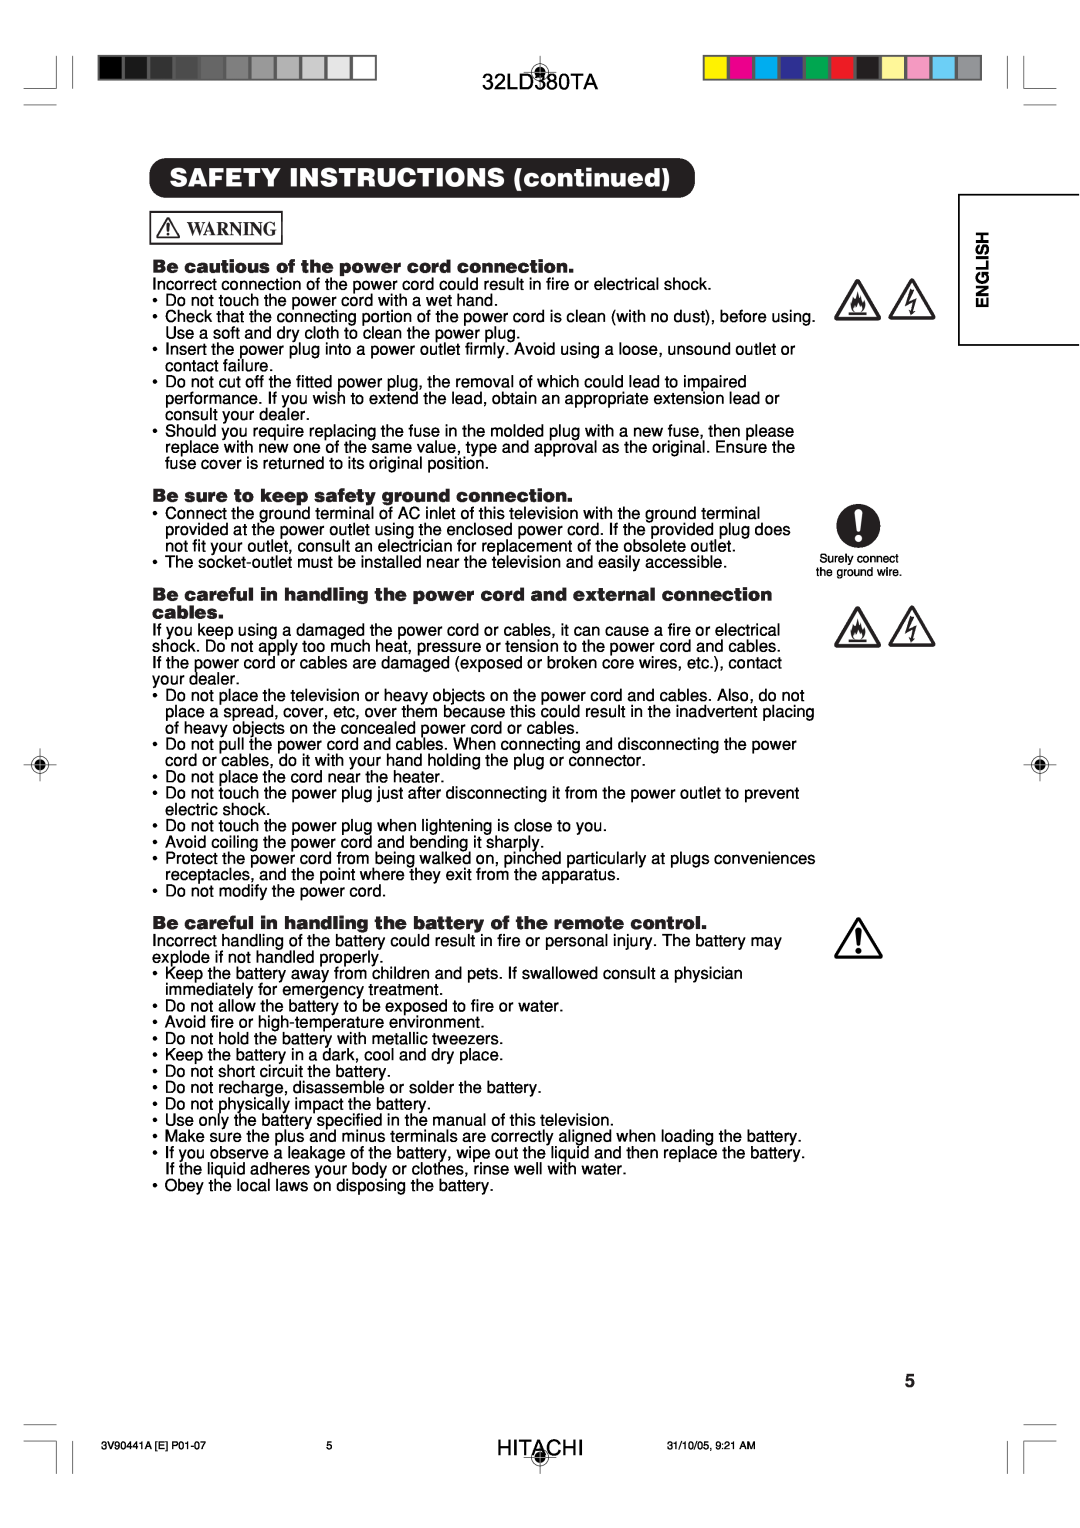 Hitachi 32LD380TA user manual SAFETY INSTRUCTIONS continued, Be cautious of the power cord connection, Hitachi, English 